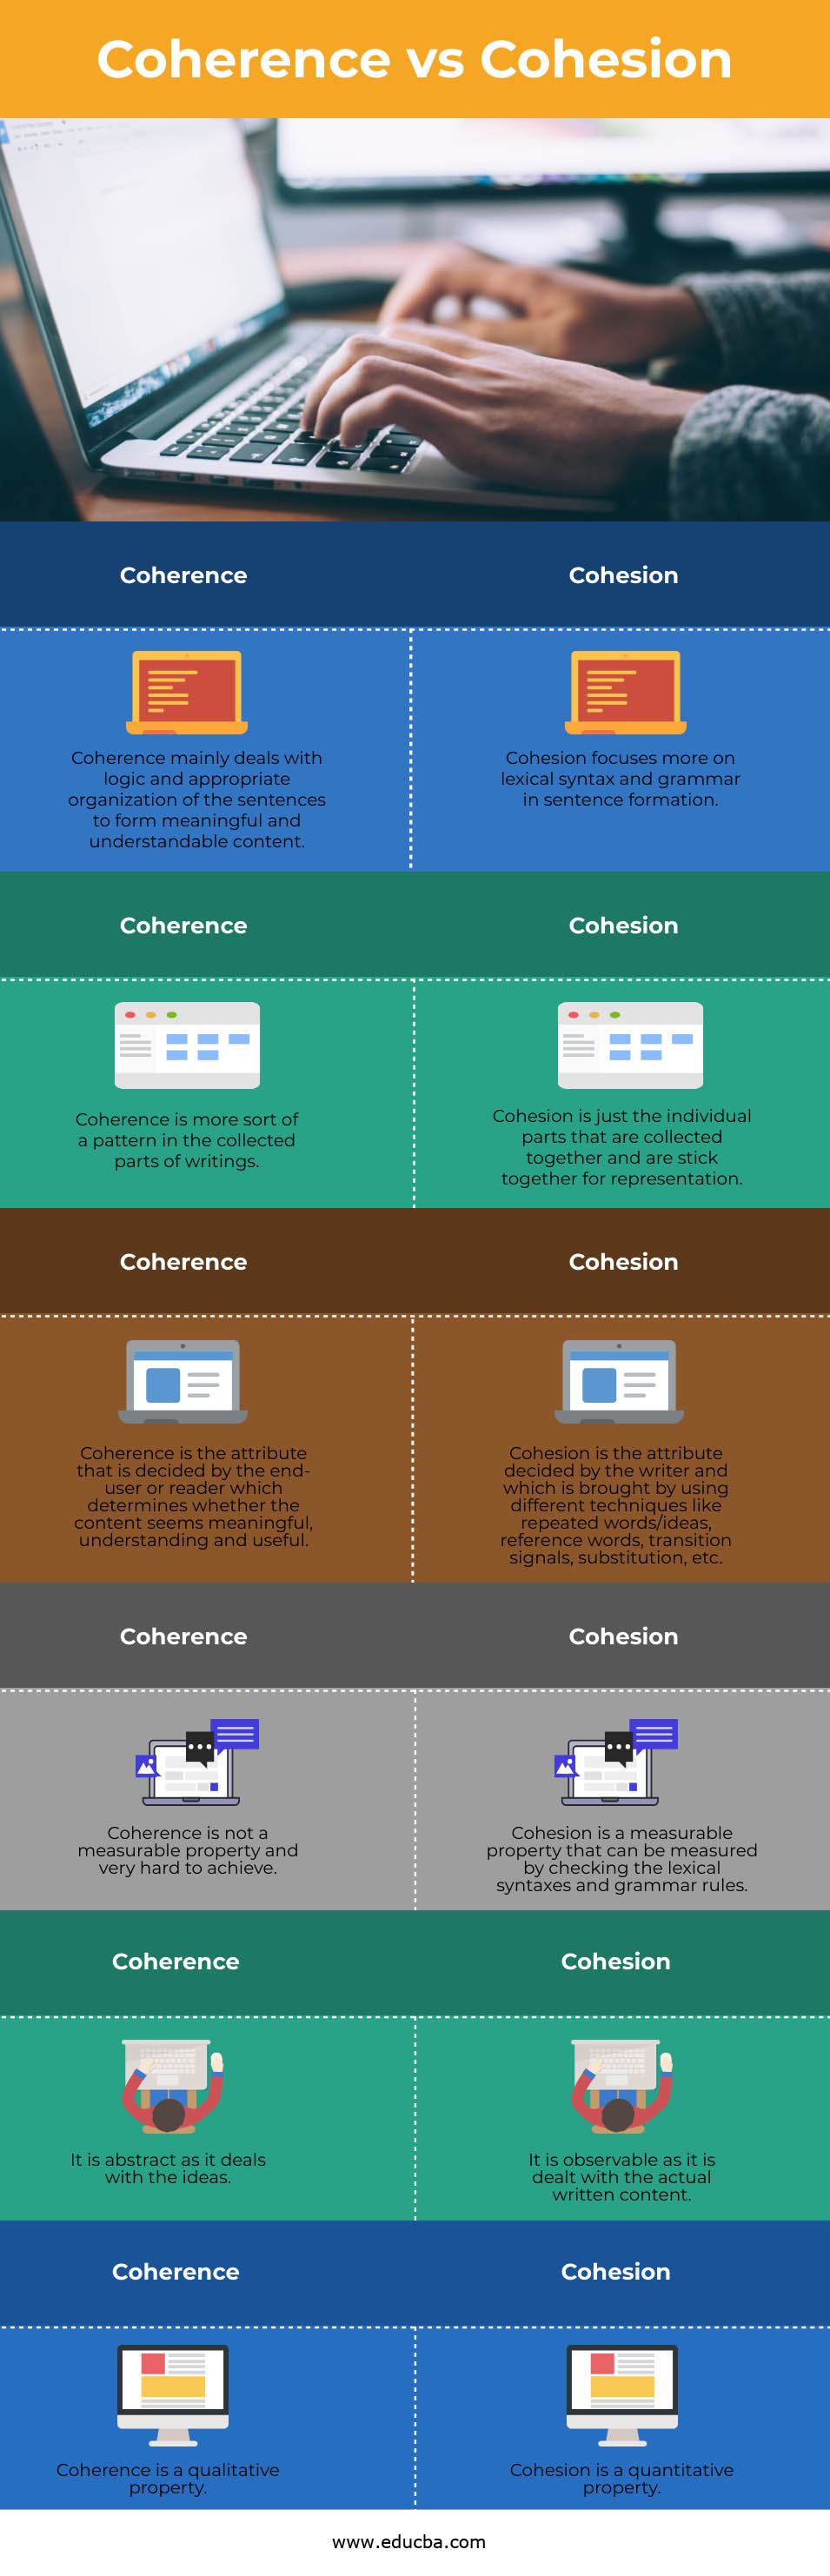 Coherence vs Cohesion info